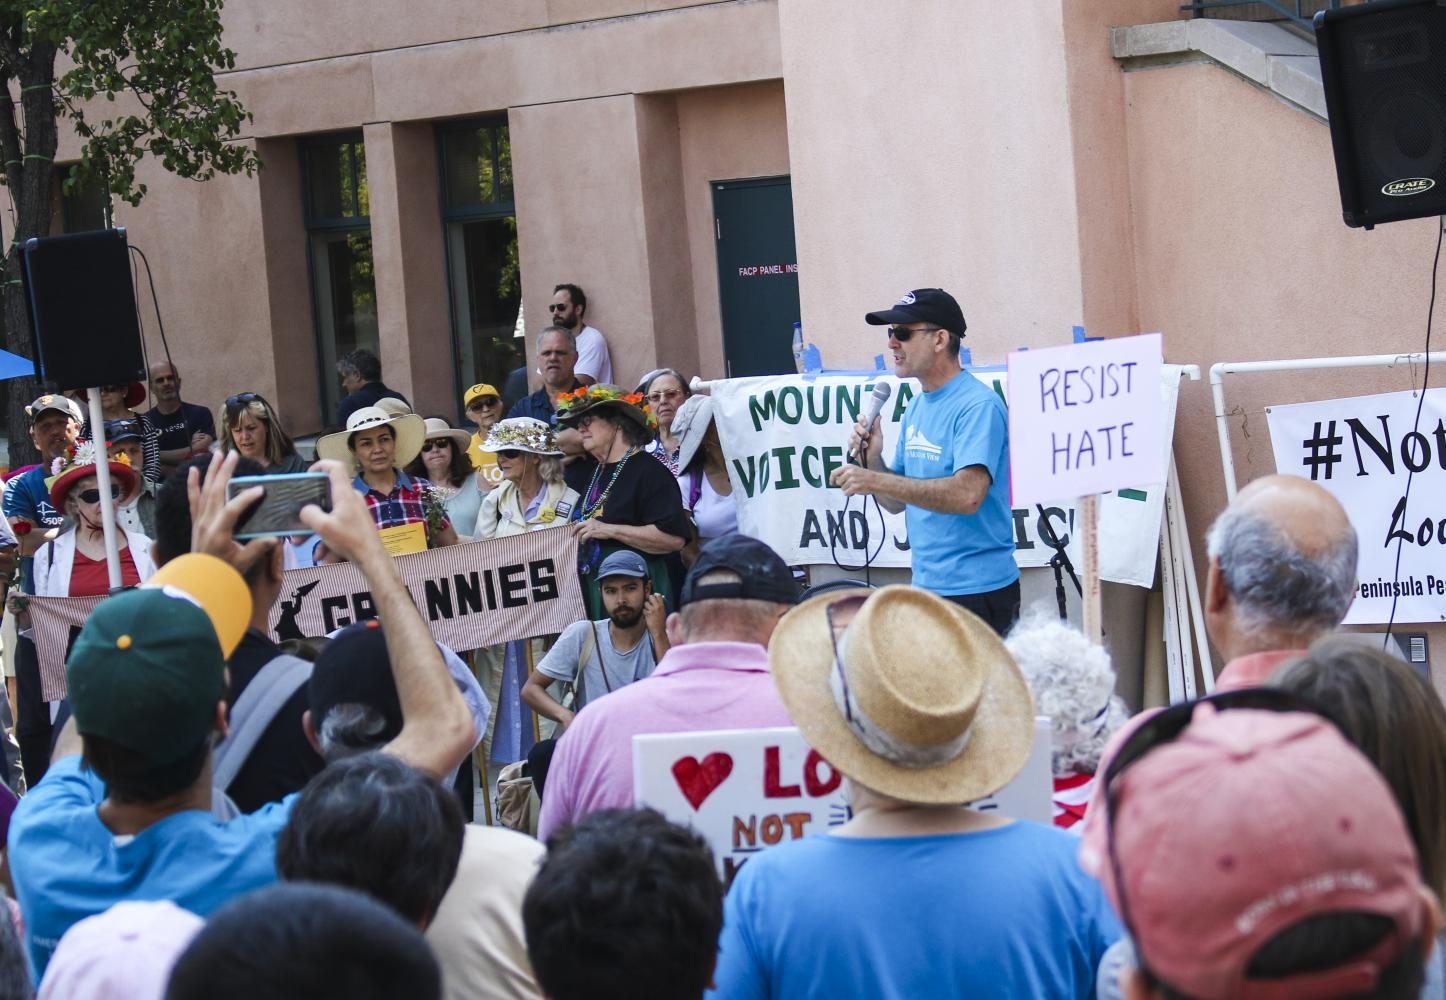 Mountain View Leaders Organize Equality and Diversity Rally